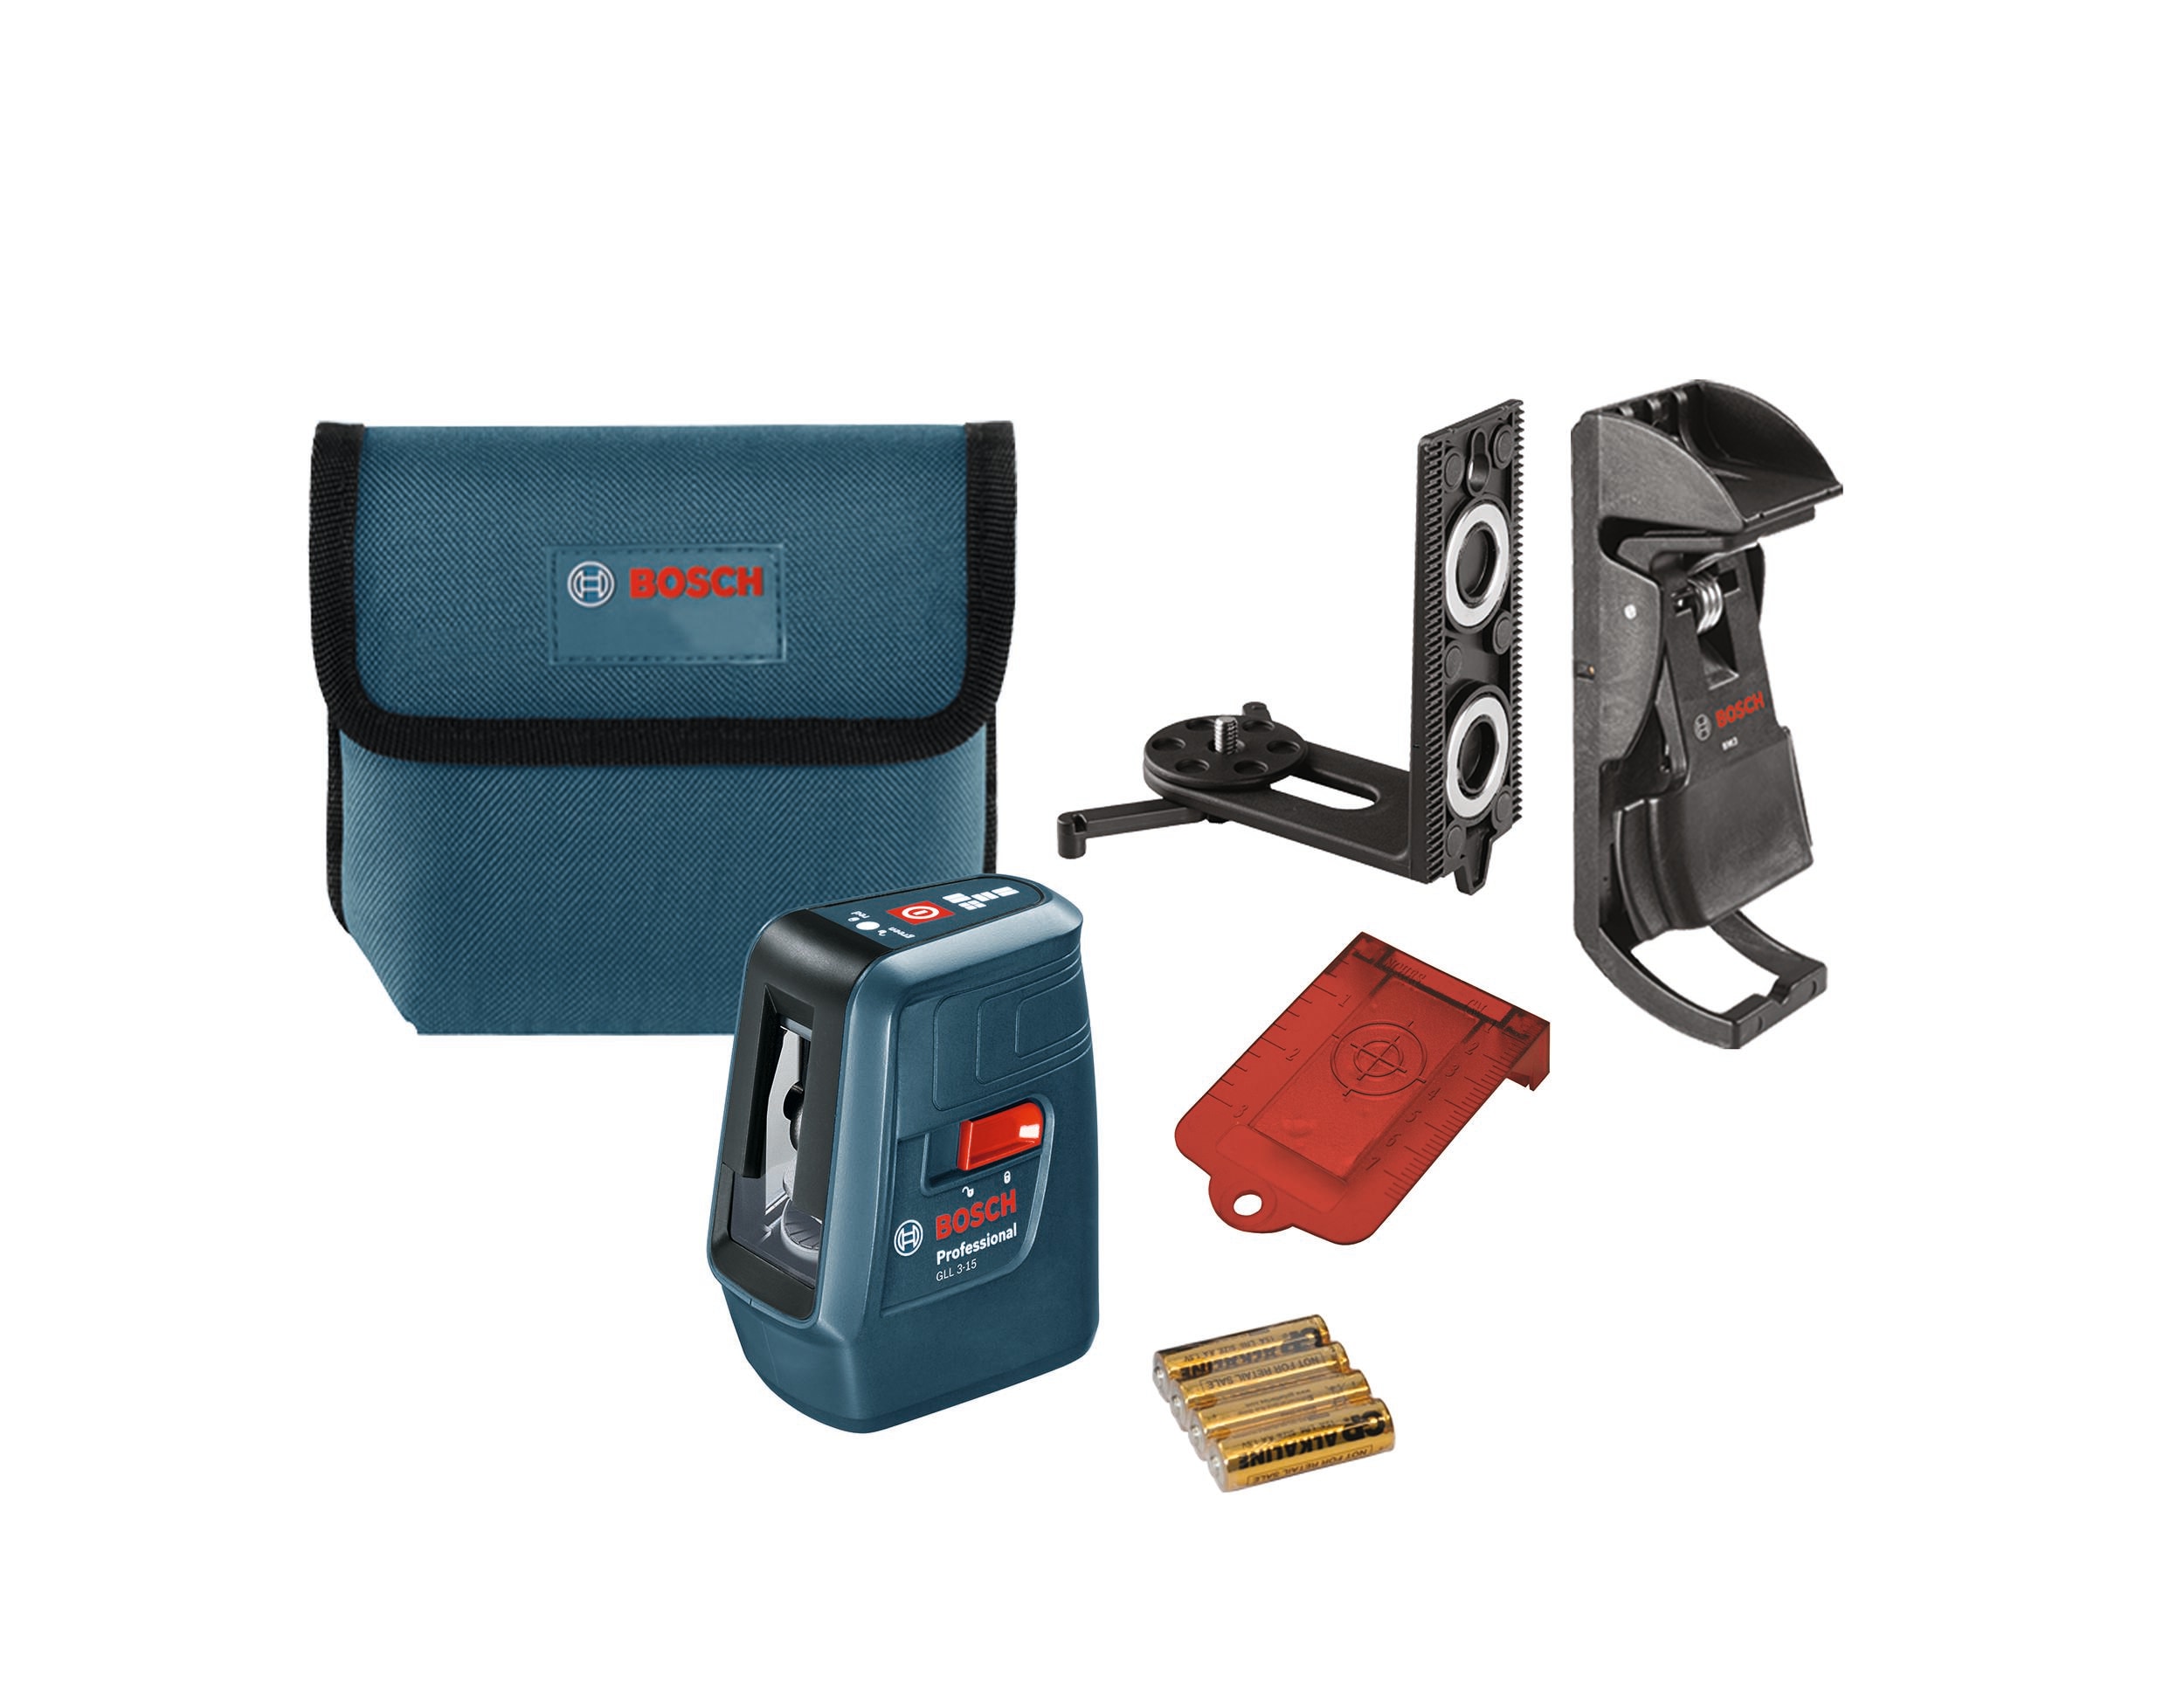 Bosch GLL 3 x Professional Compact 3-Line Laser